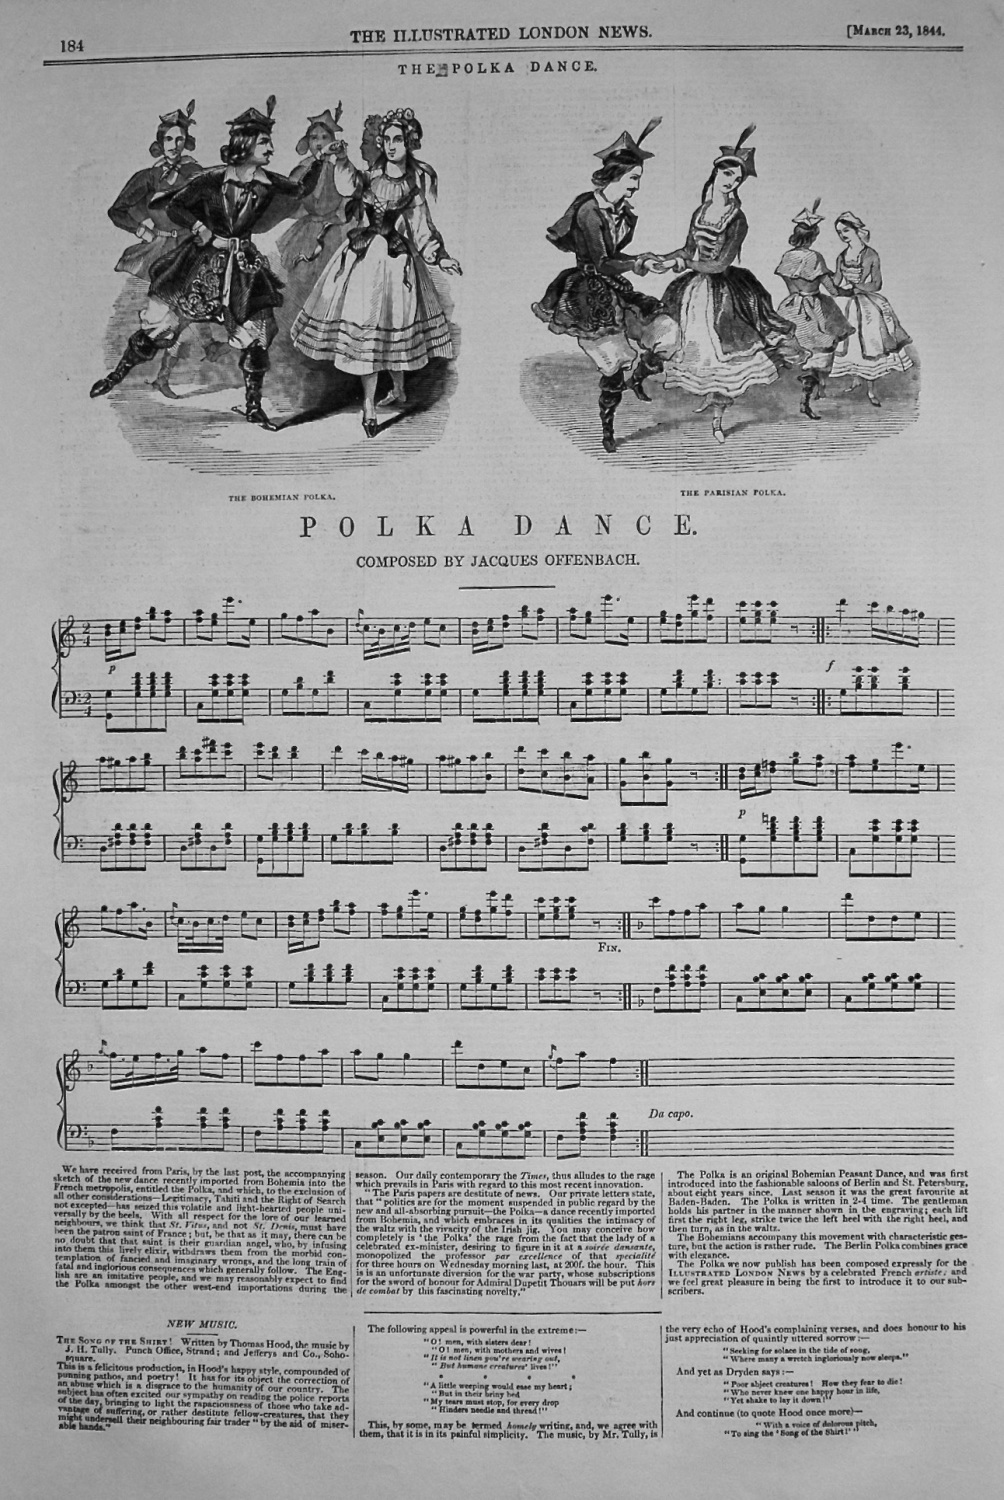 Polka Dance. Composed by Jacques Offenbach. 1844